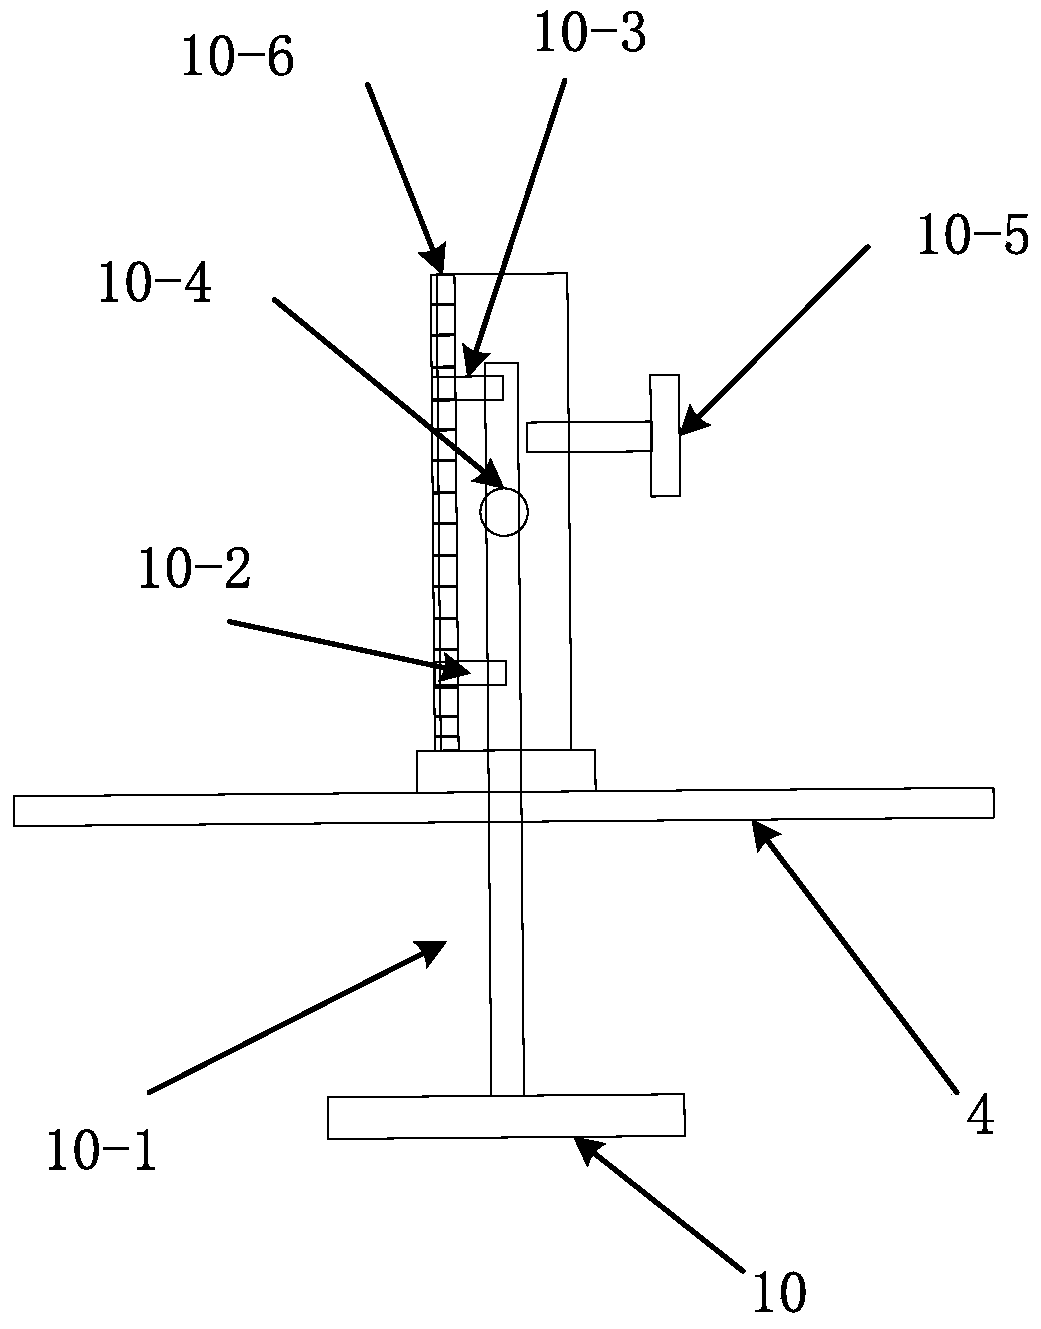 DC beam cutting device based on sine wave waveforms